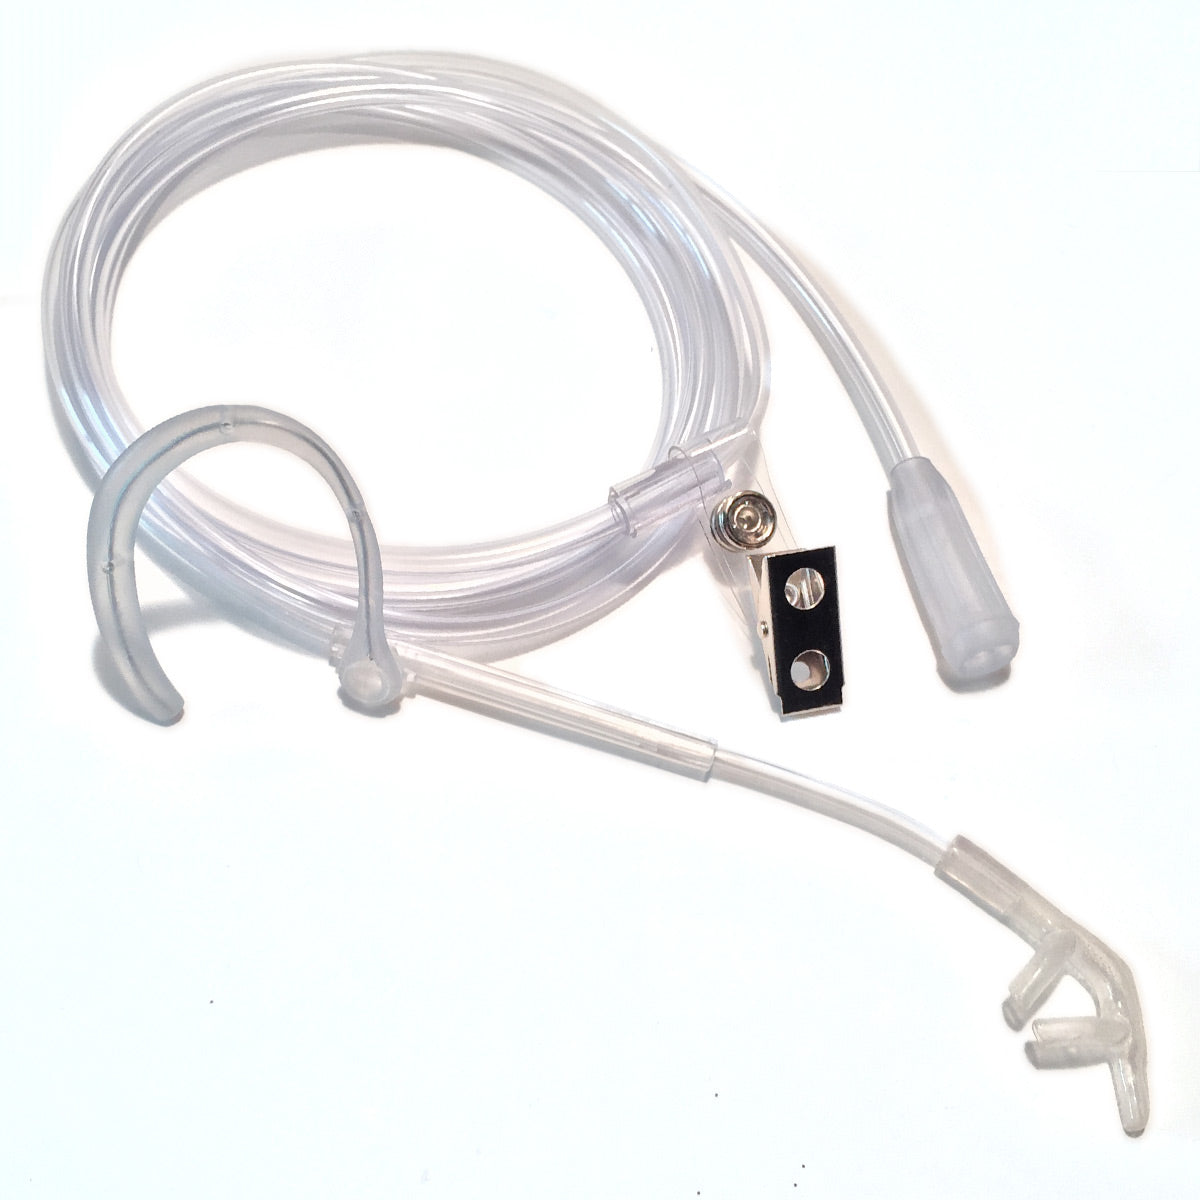 OxyBreather Single Sided Nasal Cannula with 4 Foot Oxygen Supply Tubing